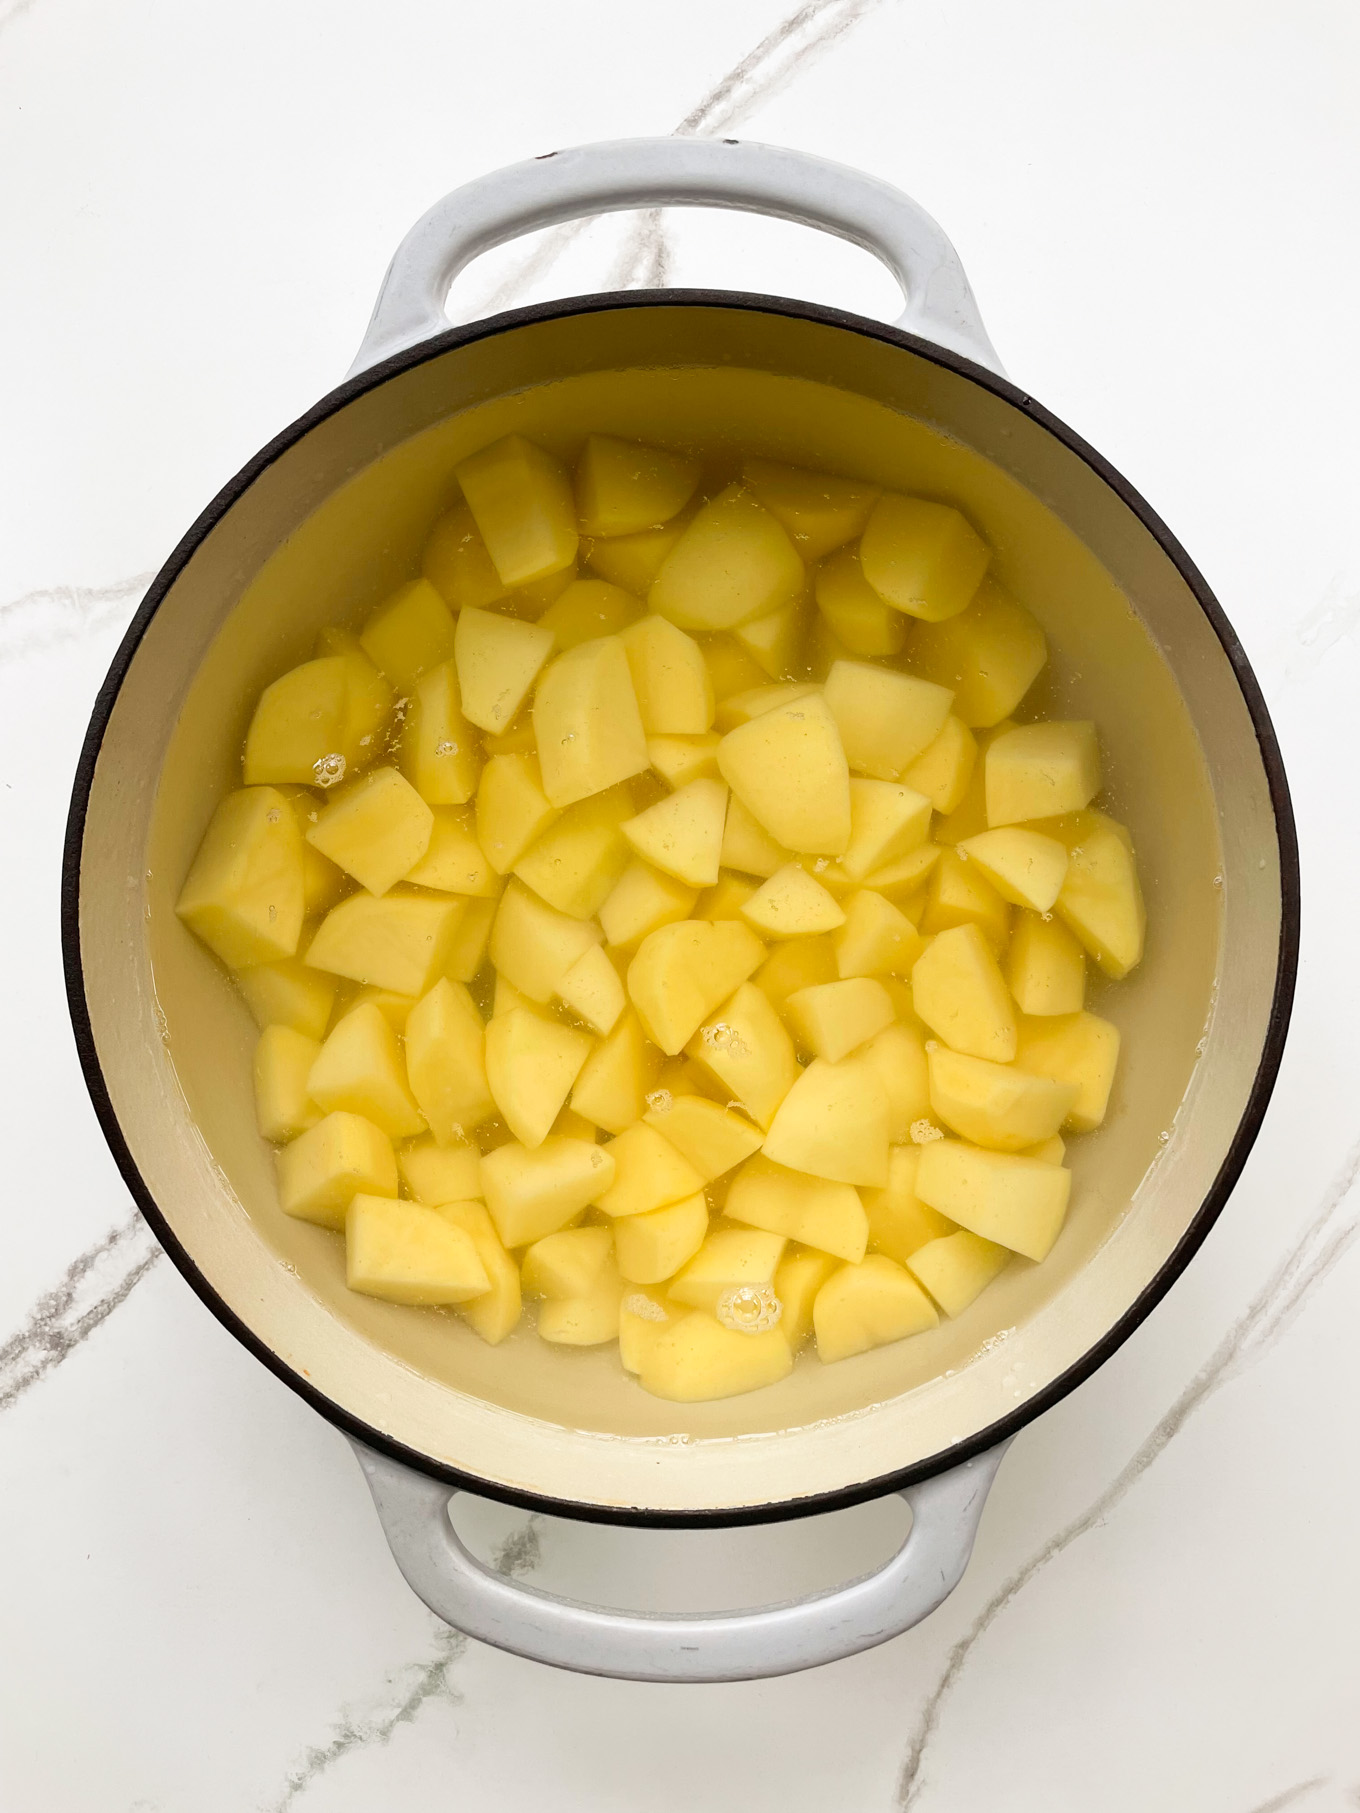 cut up potatoes in a pot with water over them.